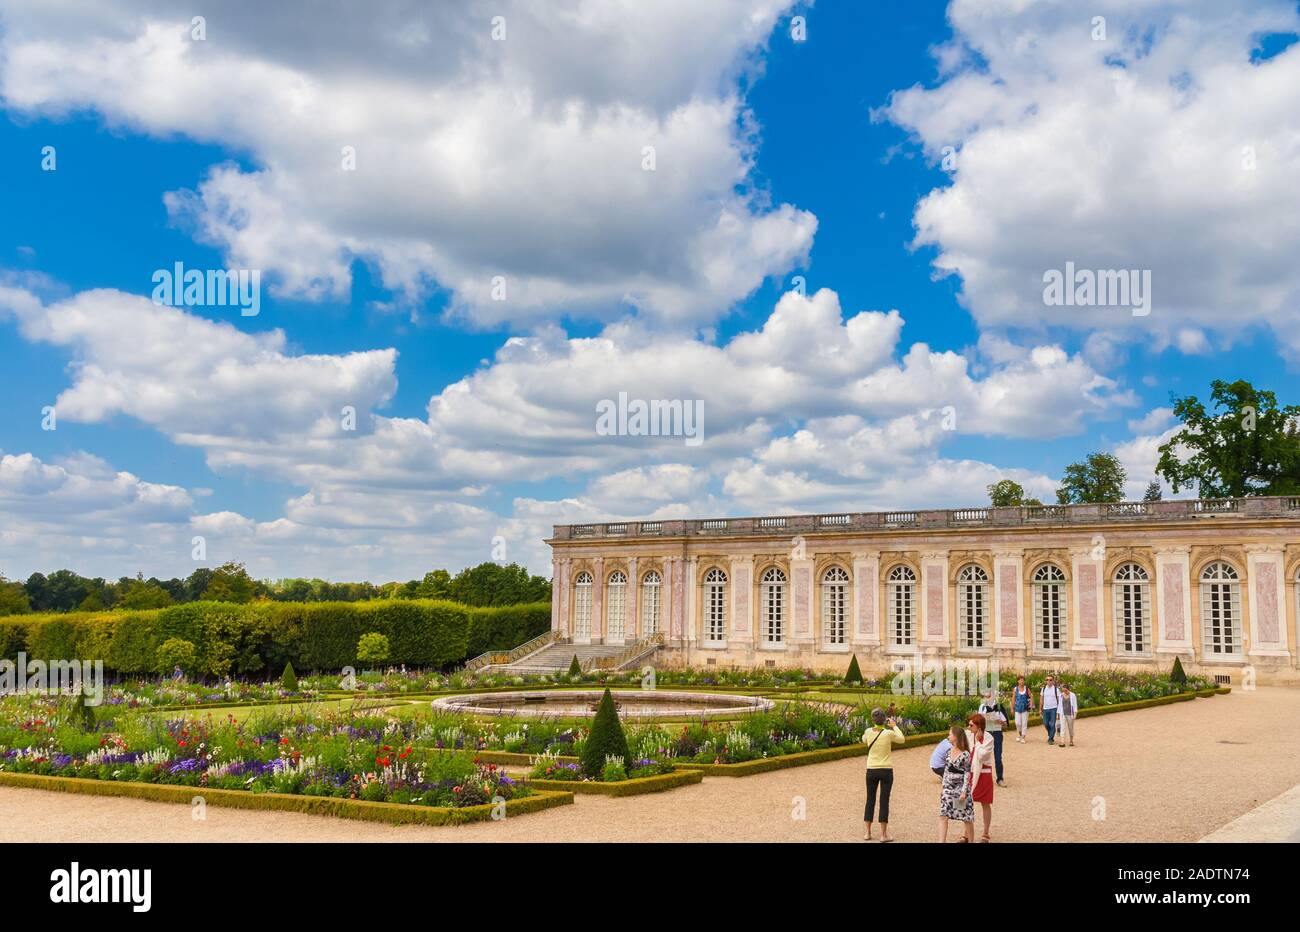 Lovely view of the orderly French garden with the Cotelle Gallery in the north wing of the Grand Trianon Palace in the background. The outdoor setting... Stock Photo